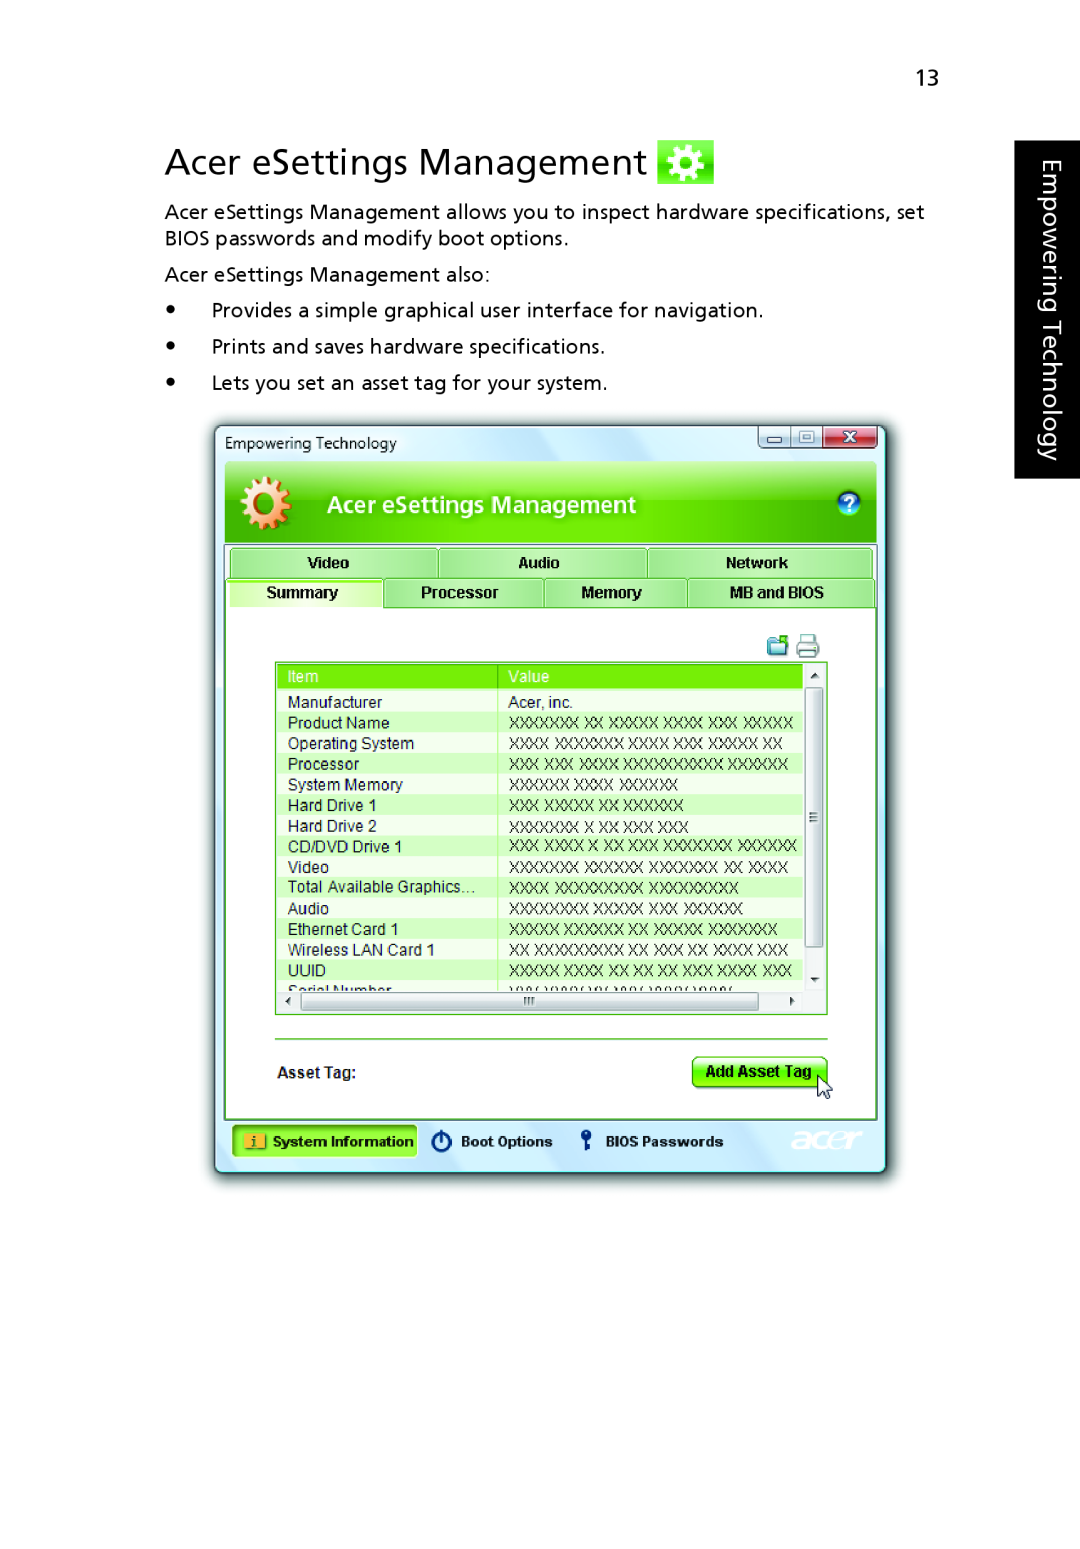 Acer MS2219, 4920 manual Empowering Technology, Acer eSettings Management also, Prints and saves hardware specifications 